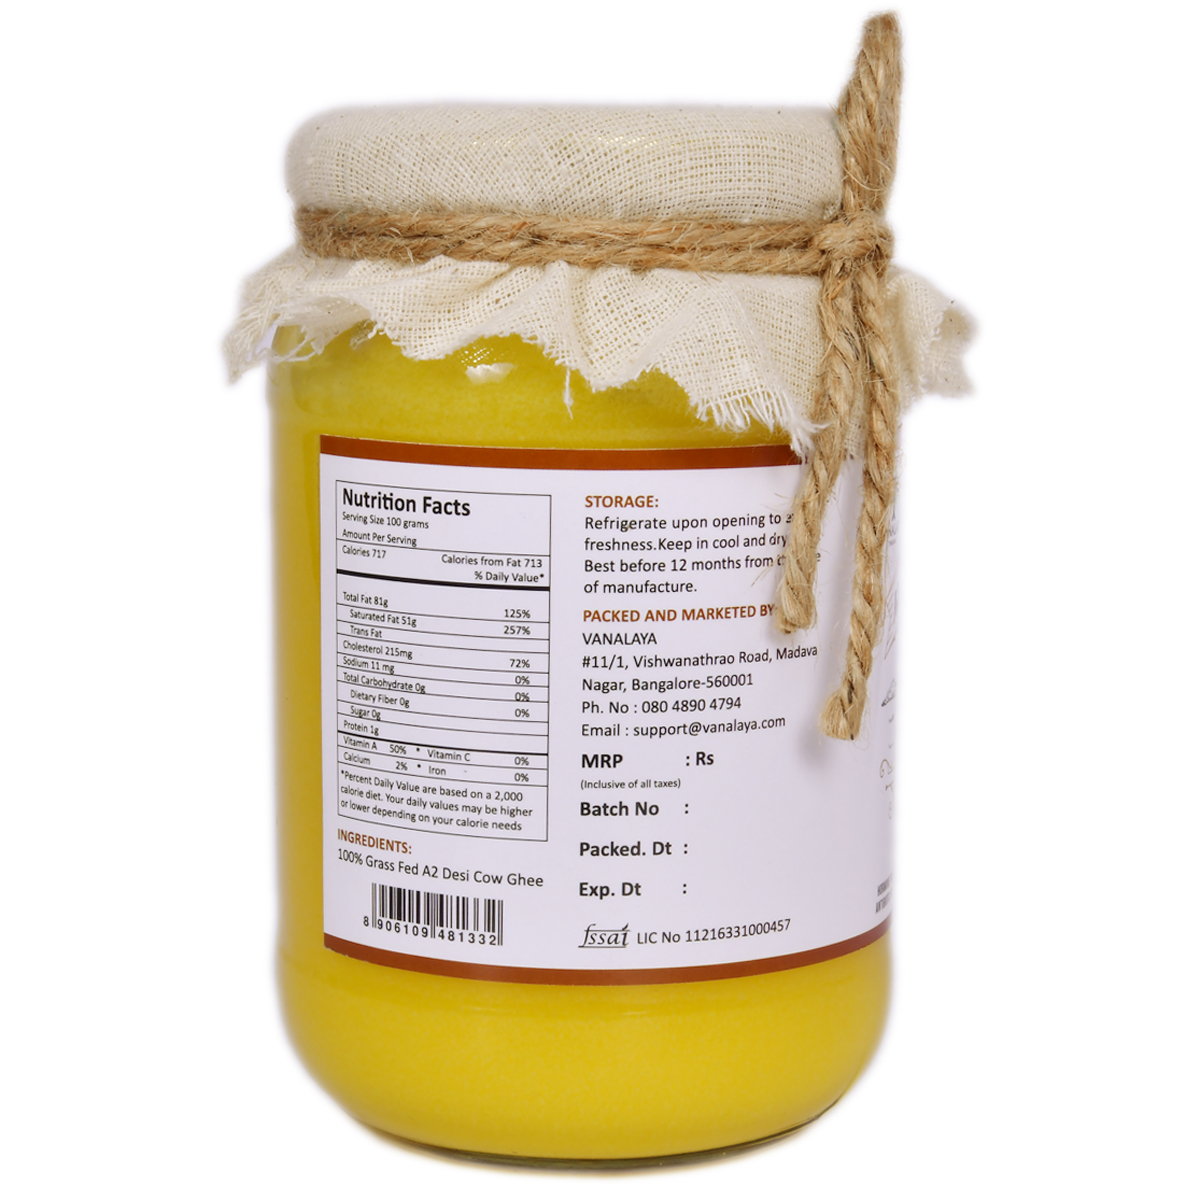 Picture of Vanalaya A2 Desi Cow Ghee from A2 Milk Prepared by Traditional Bilona Method 500ml